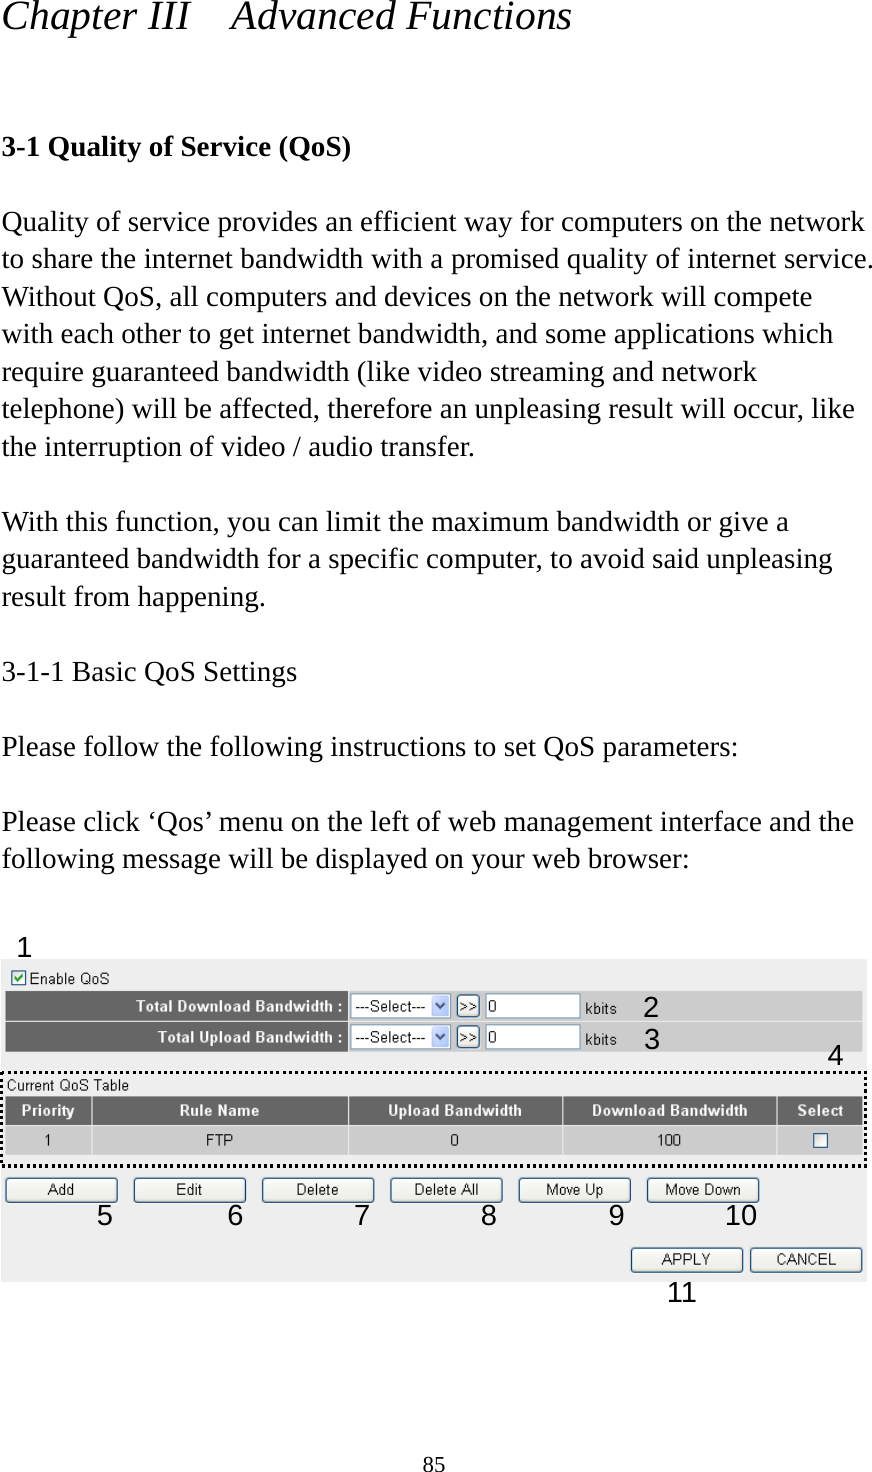 85 Chapter III    Advanced Functions  3-1 Quality of Service (QoS)  Quality of service provides an efficient way for computers on the network to share the internet bandwidth with a promised quality of internet service. Without QoS, all computers and devices on the network will compete with each other to get internet bandwidth, and some applications which require guaranteed bandwidth (like video streaming and network telephone) will be affected, therefore an unpleasing result will occur, like the interruption of video / audio transfer.    With this function, you can limit the maximum bandwidth or give a guaranteed bandwidth for a specific computer, to avoid said unpleasing result from happening.  3-1-1 Basic QoS Settings  Please follow the following instructions to set QoS parameters:  Please click ‘Qos’ menu on the left of web management interface and the following message will be displayed on your web browser:       1 2 34 5 6 7 8 9 10 11 